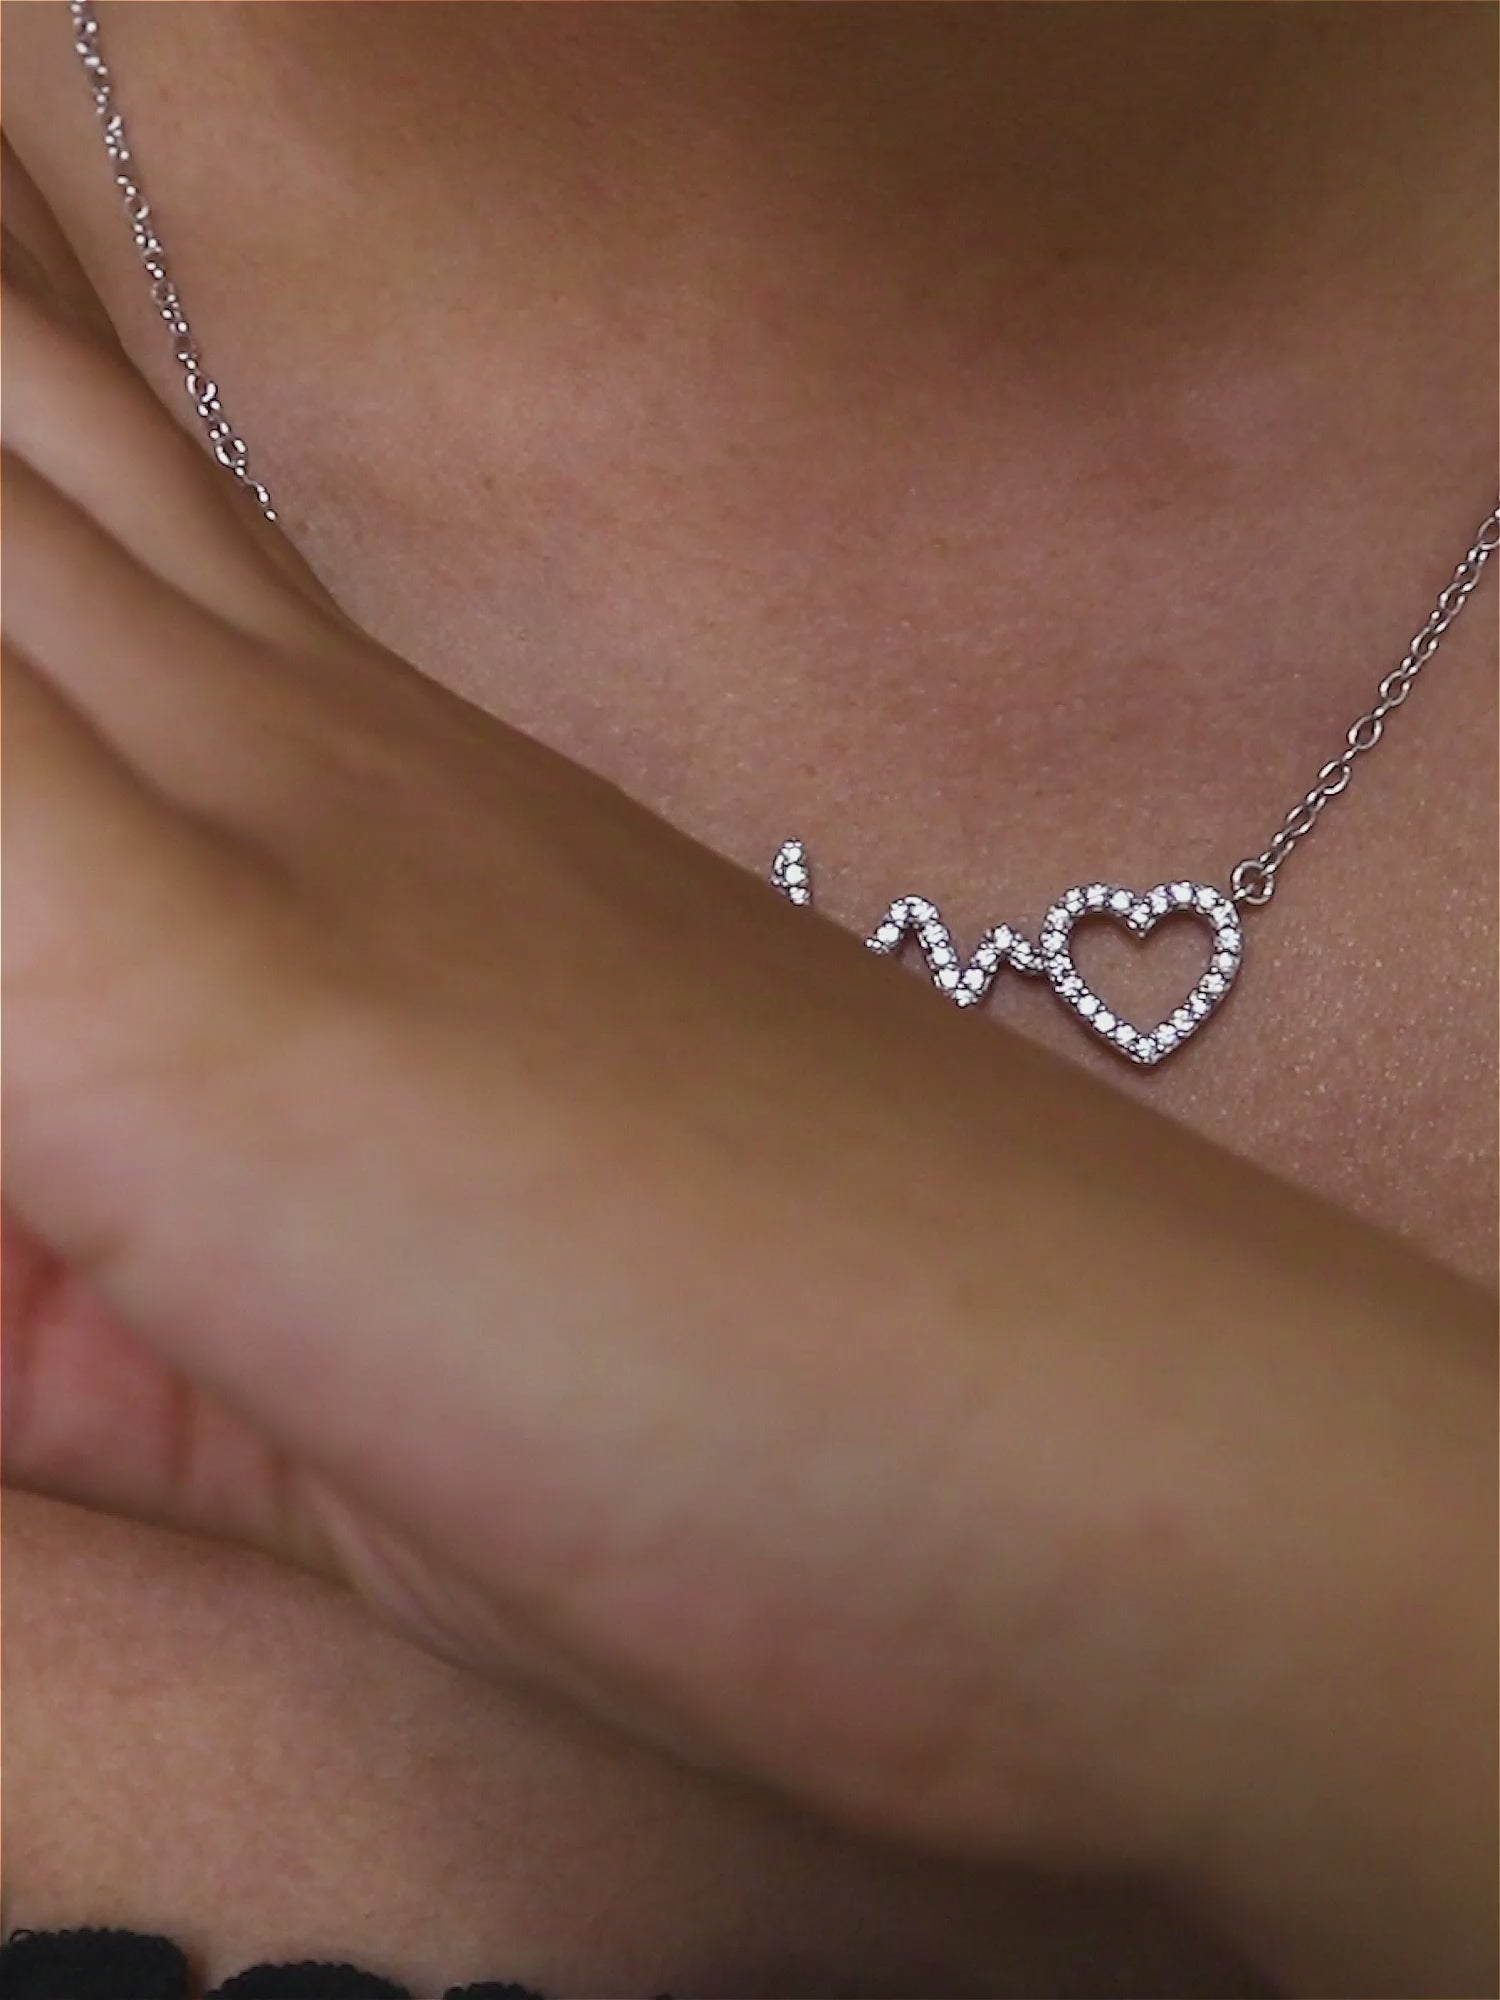 HEART BEAT NECKLACE